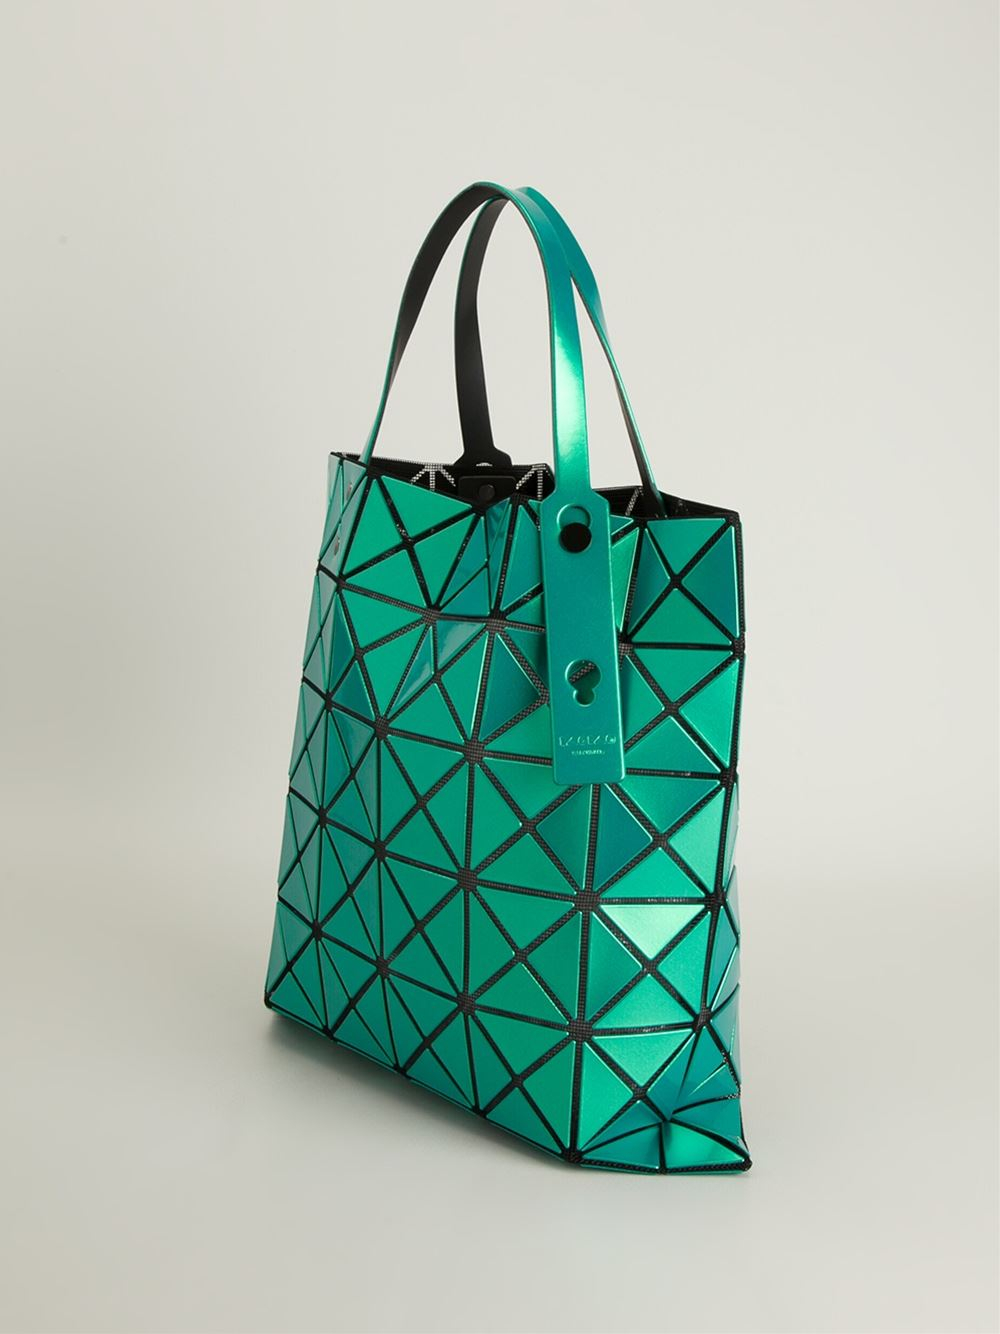 Bao Bao Issey Miyake Prism Tote in Green - Lyst